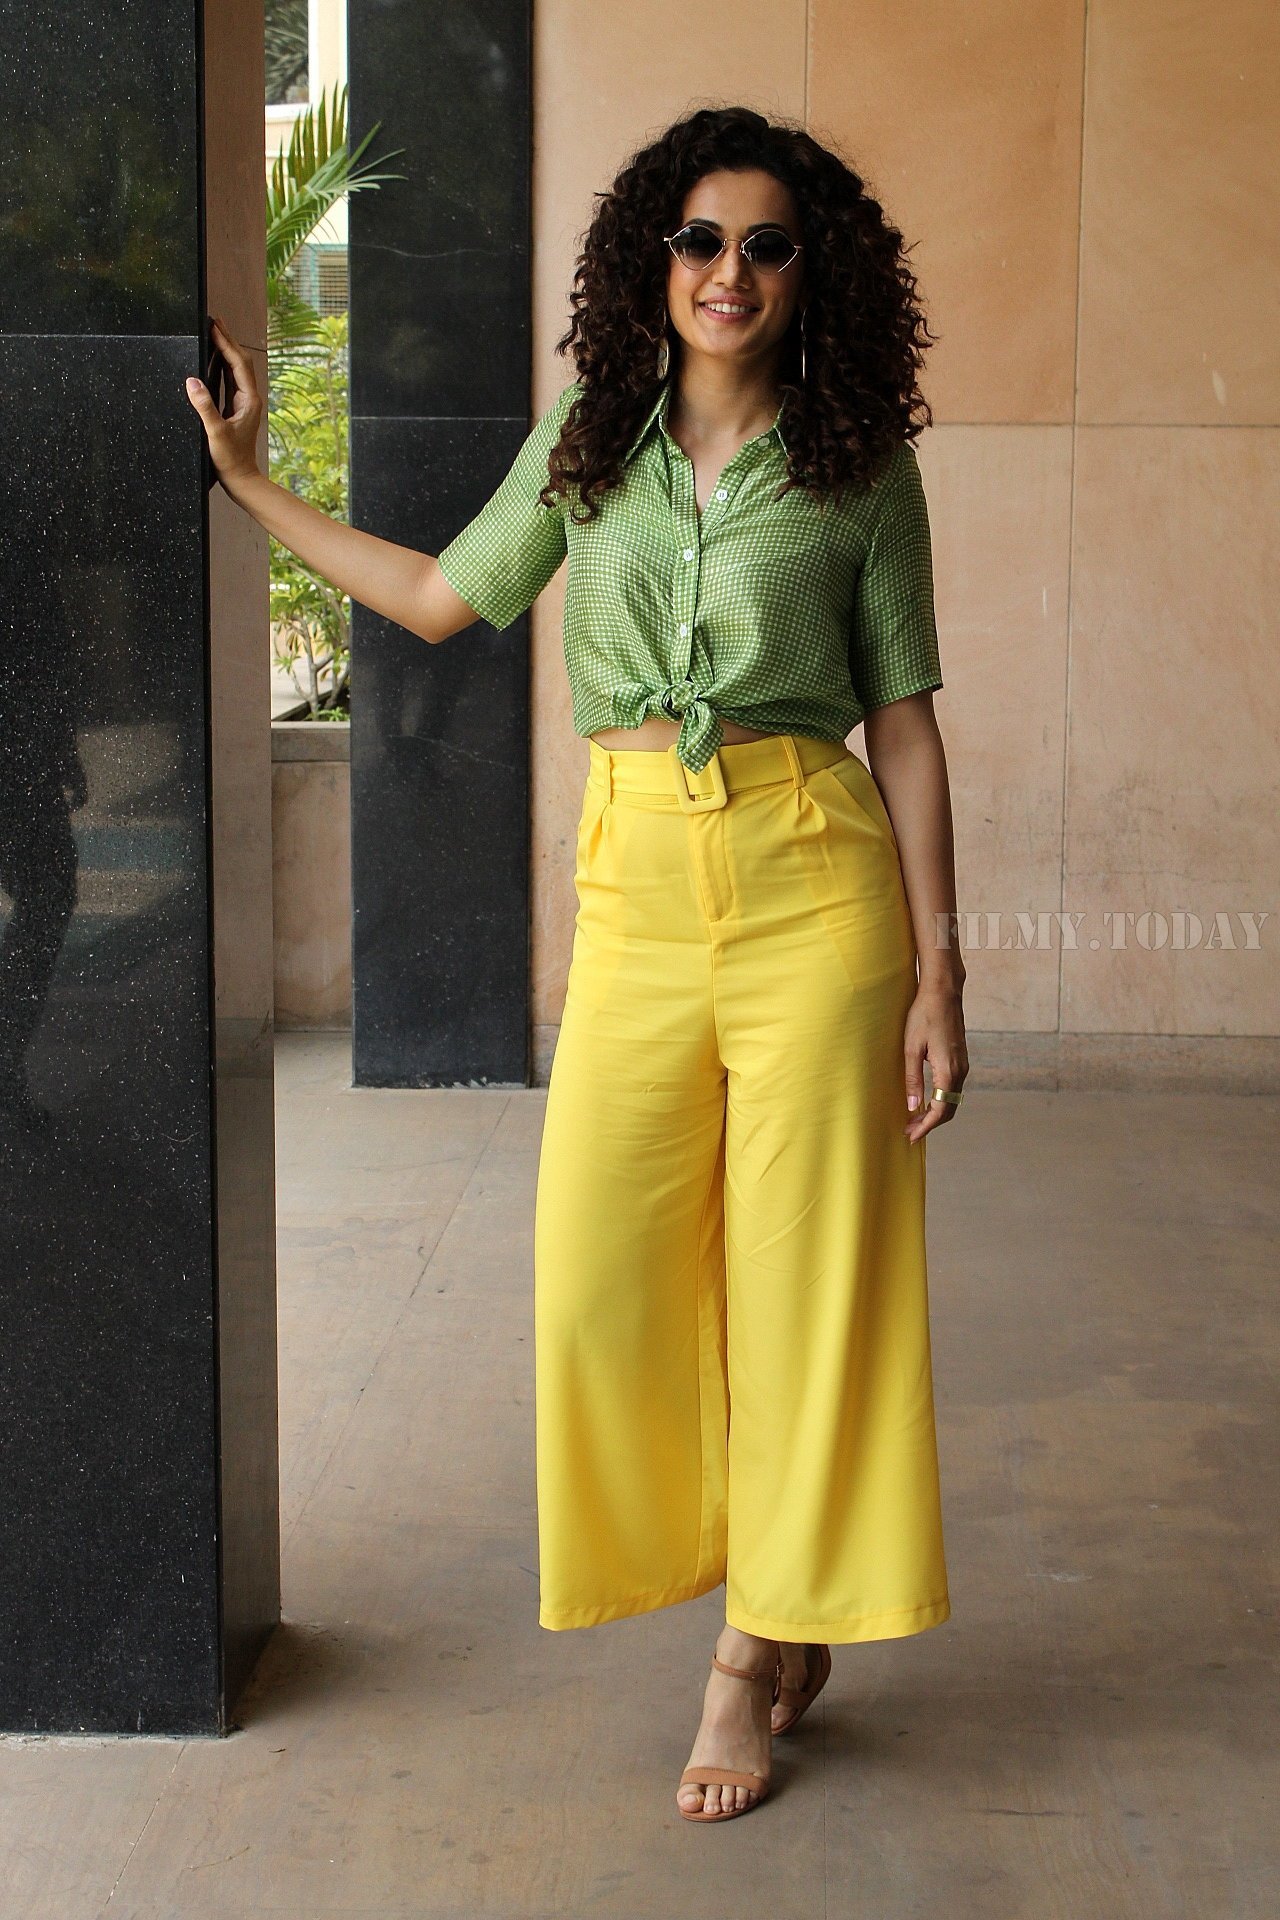 Taapsee Pannu Promoted Game Over At Novotel | Picture 1651085